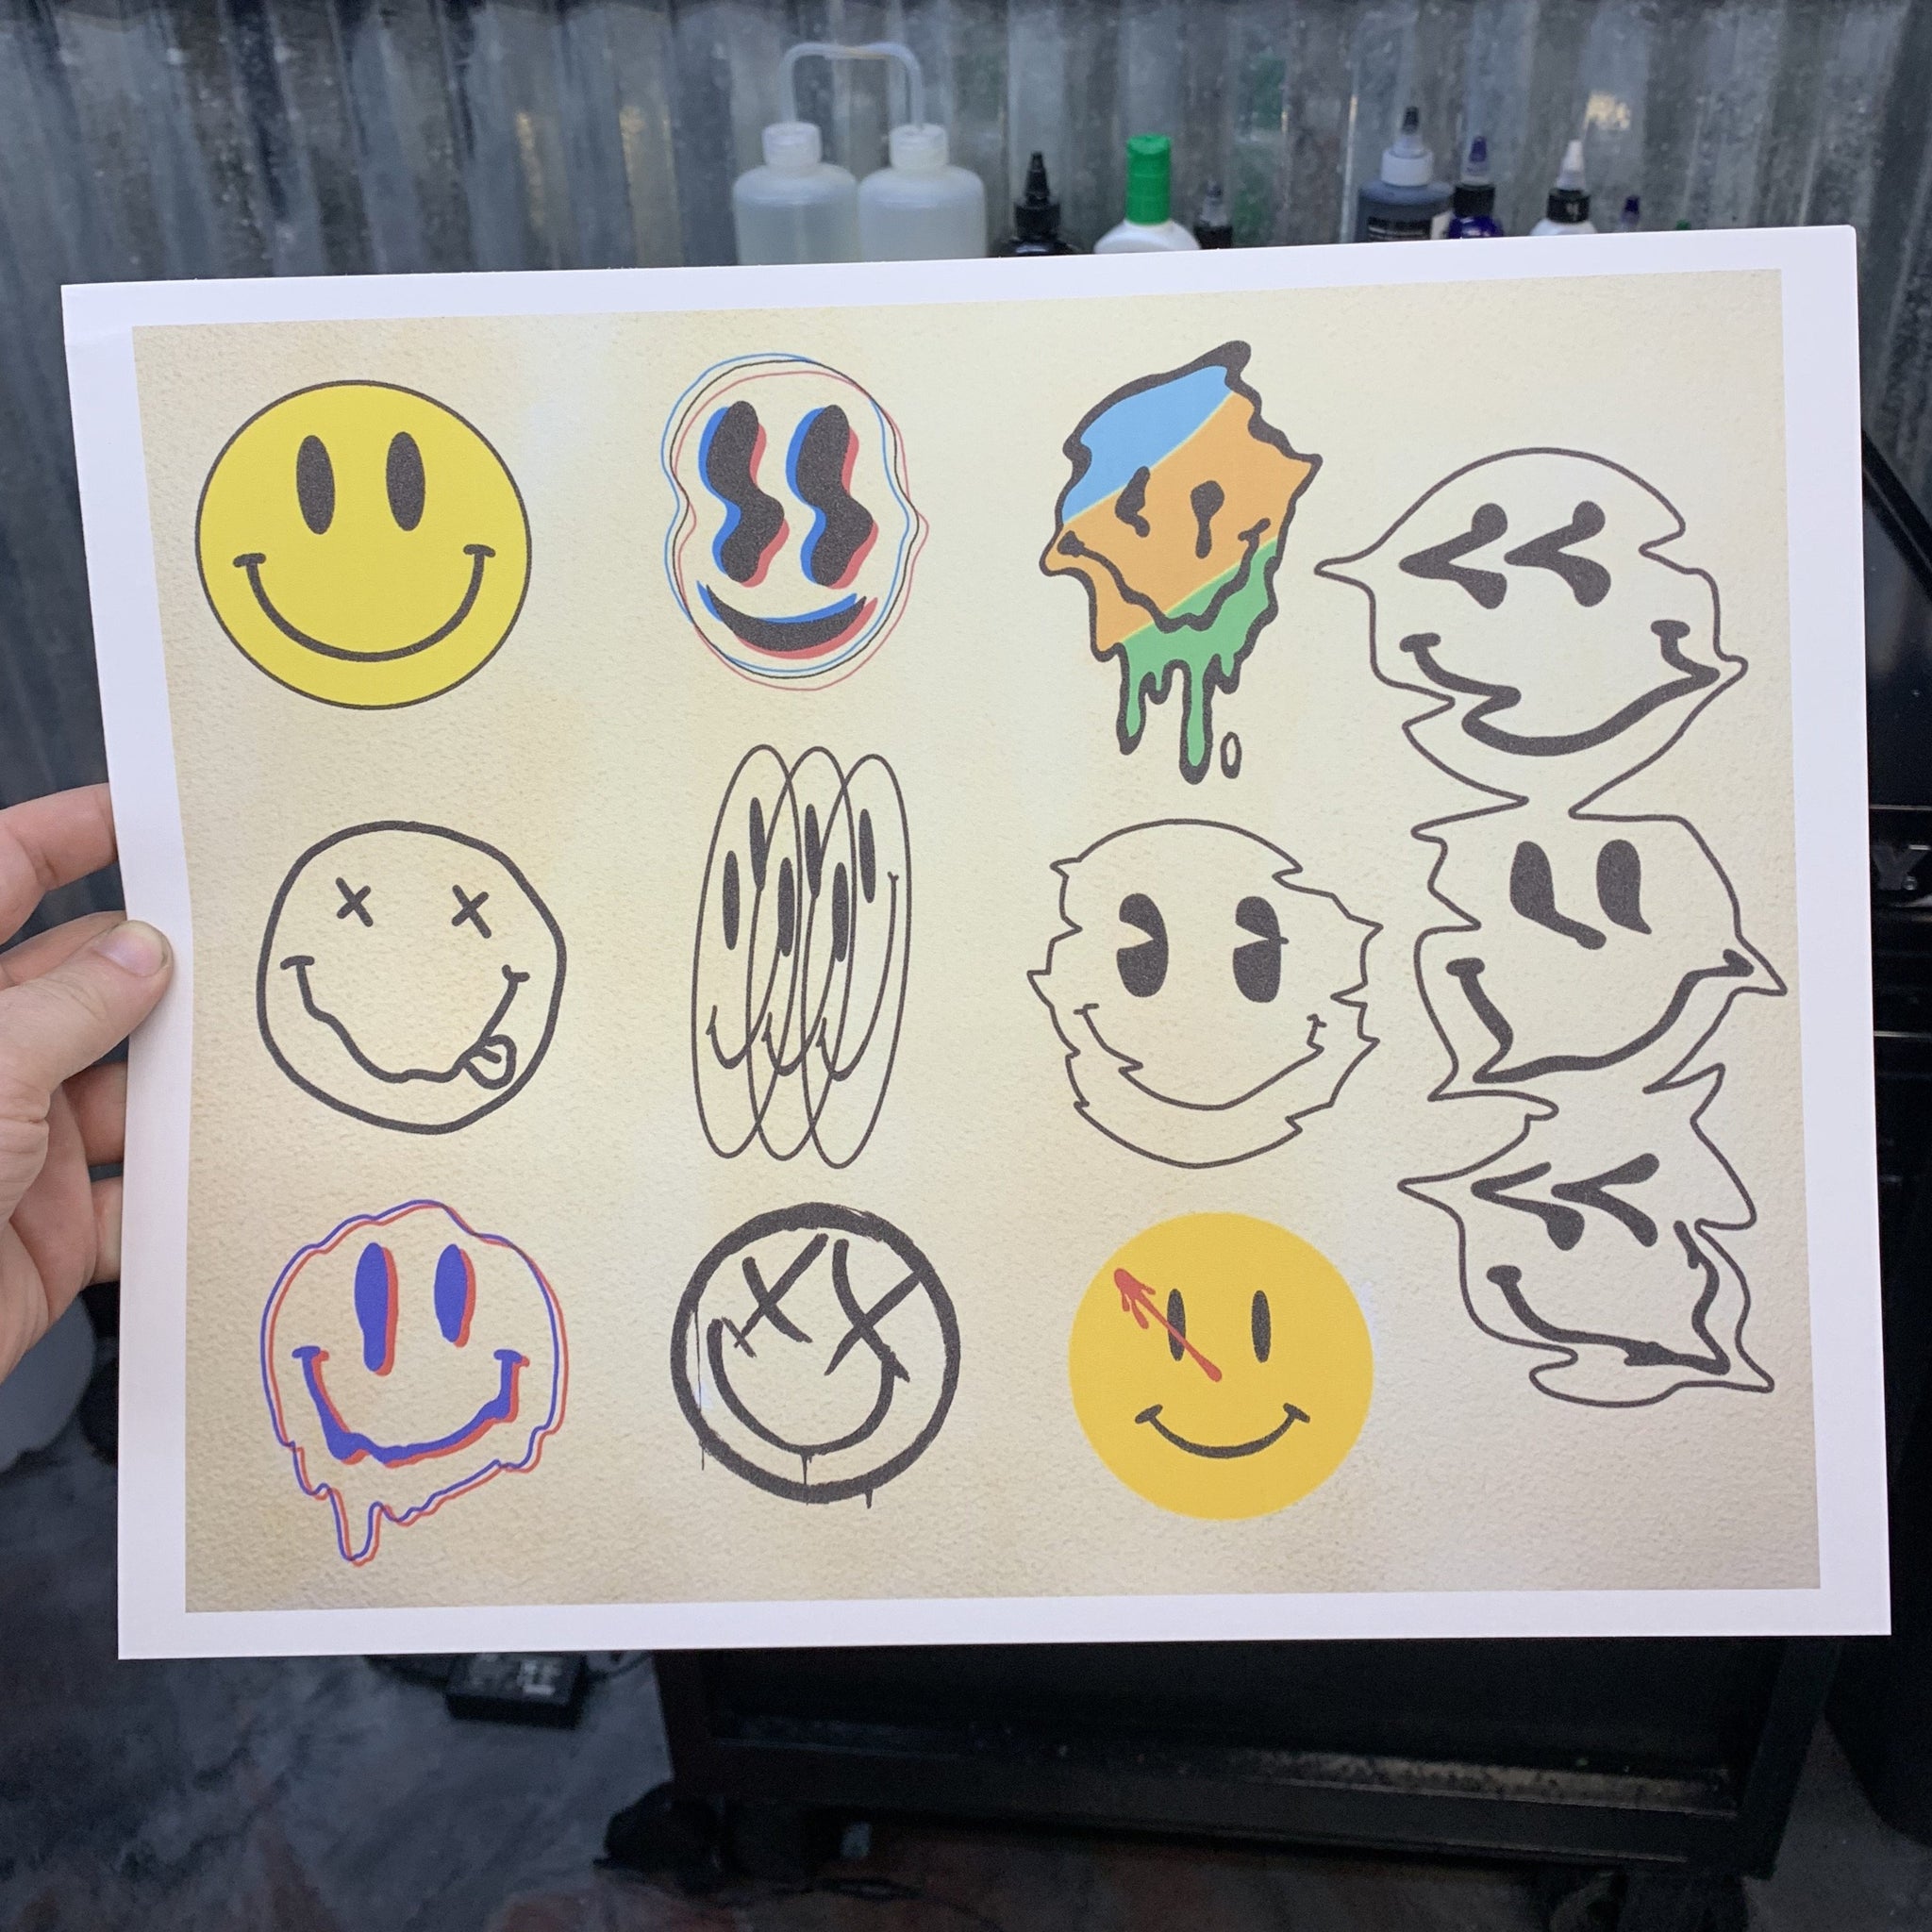 Emoji Tattoos  Pack of 36  2 Inches Assorted Goofy Smiley Face Cool  Emoticon Face Tattoo  for Kids  Great Party Favors Bag Stuffers Fun  Gift Prize  by Kidsco